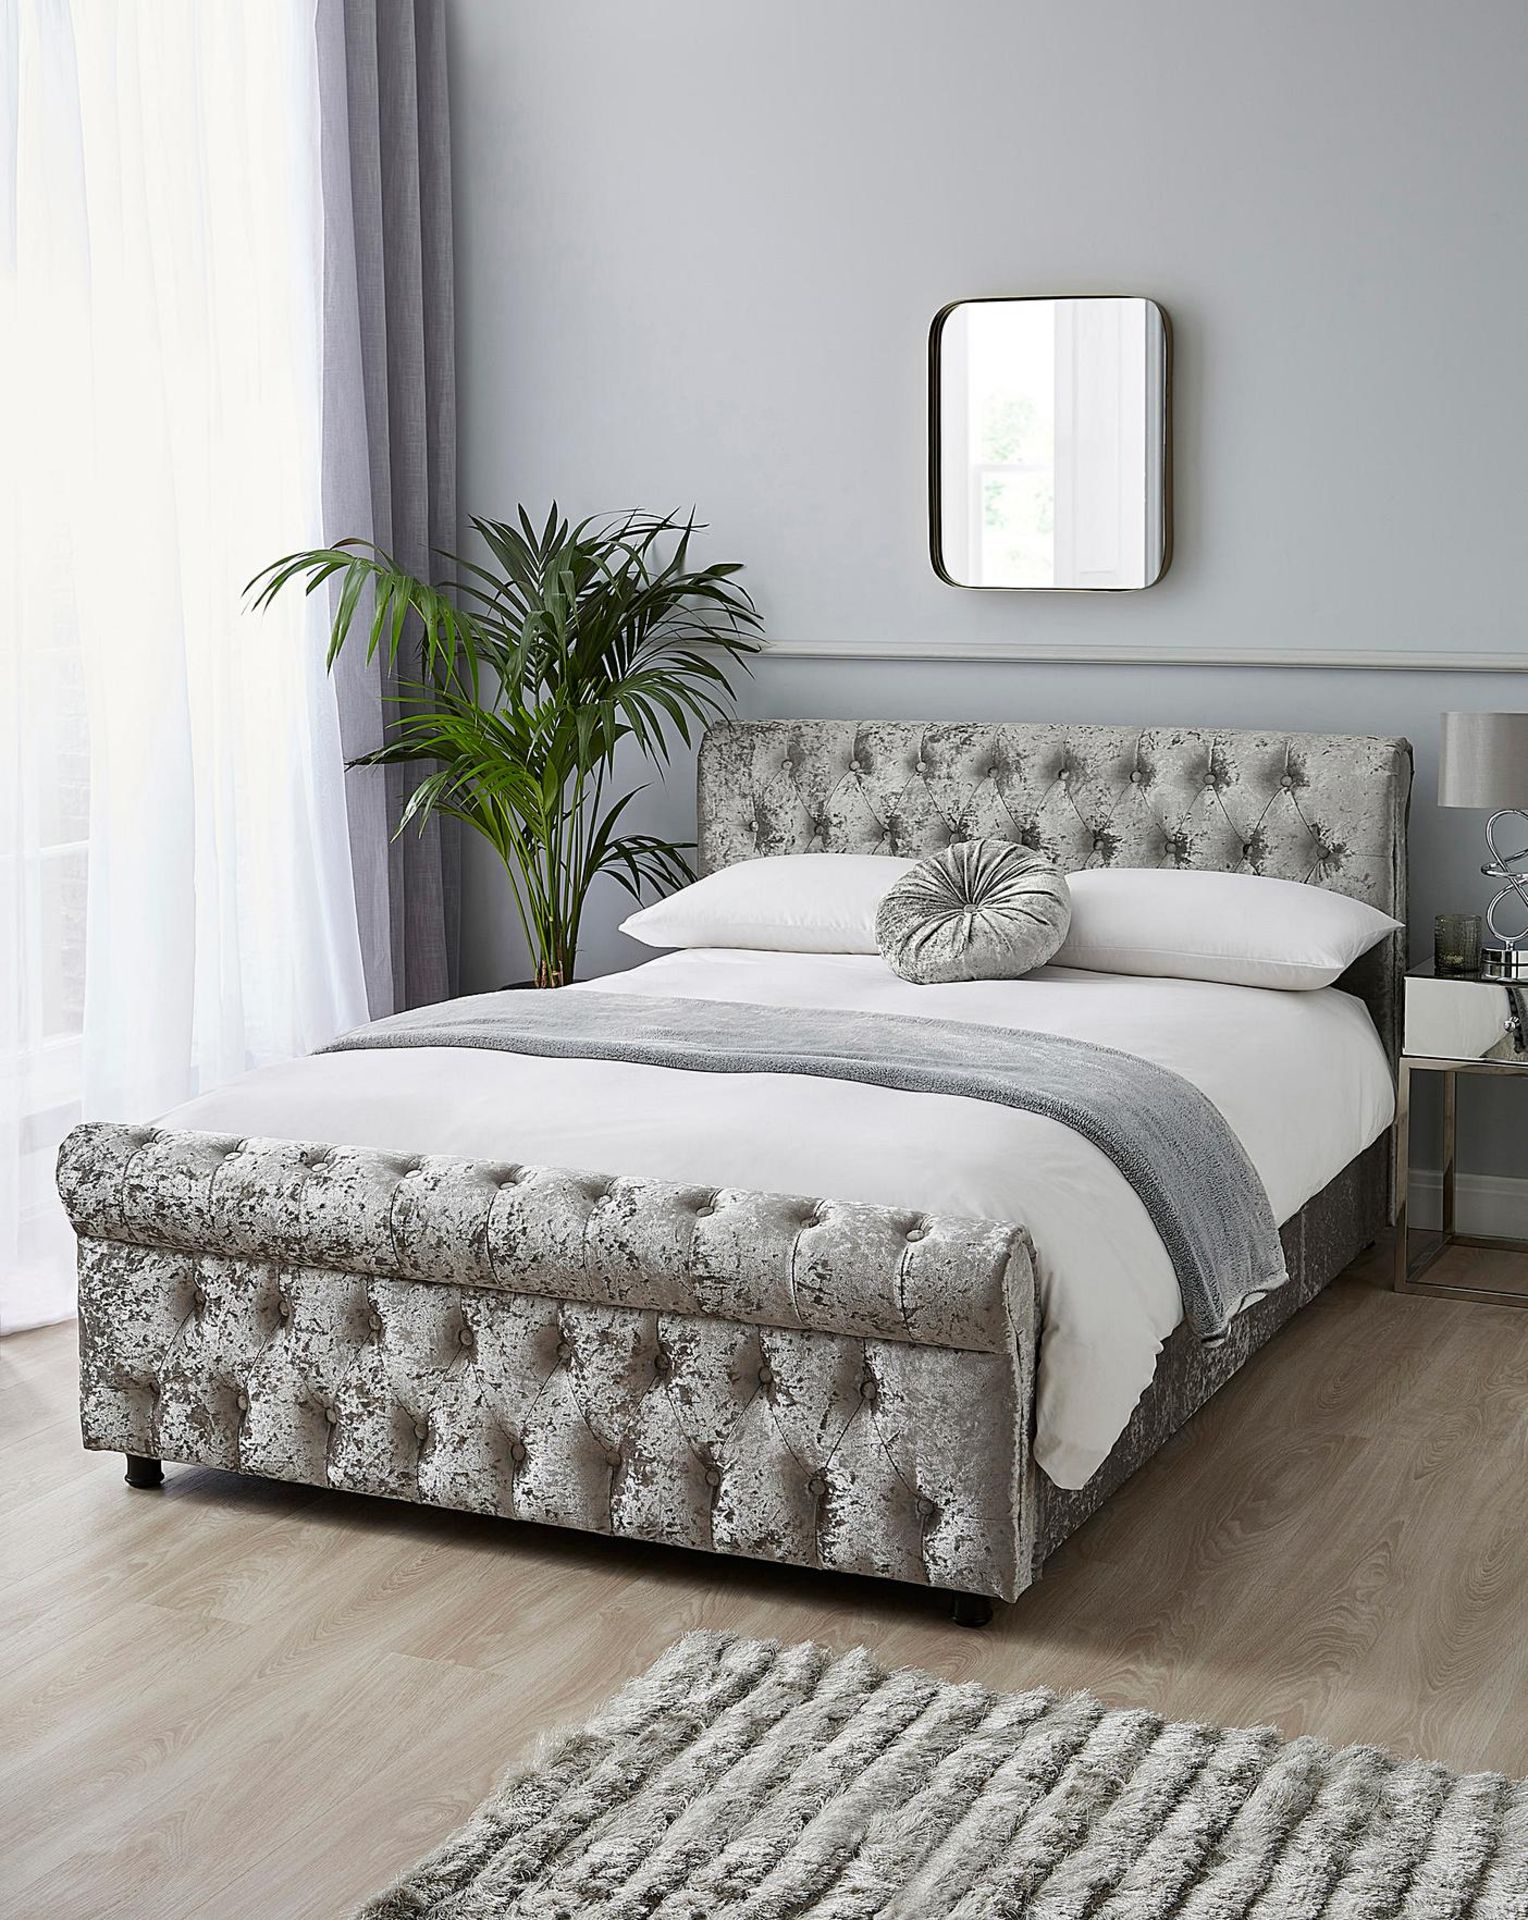 NEW & BOXED KINGSTON Crushed Velvet Bed Frame with 2 Storage Drawers - SILVER. RRP £549. The